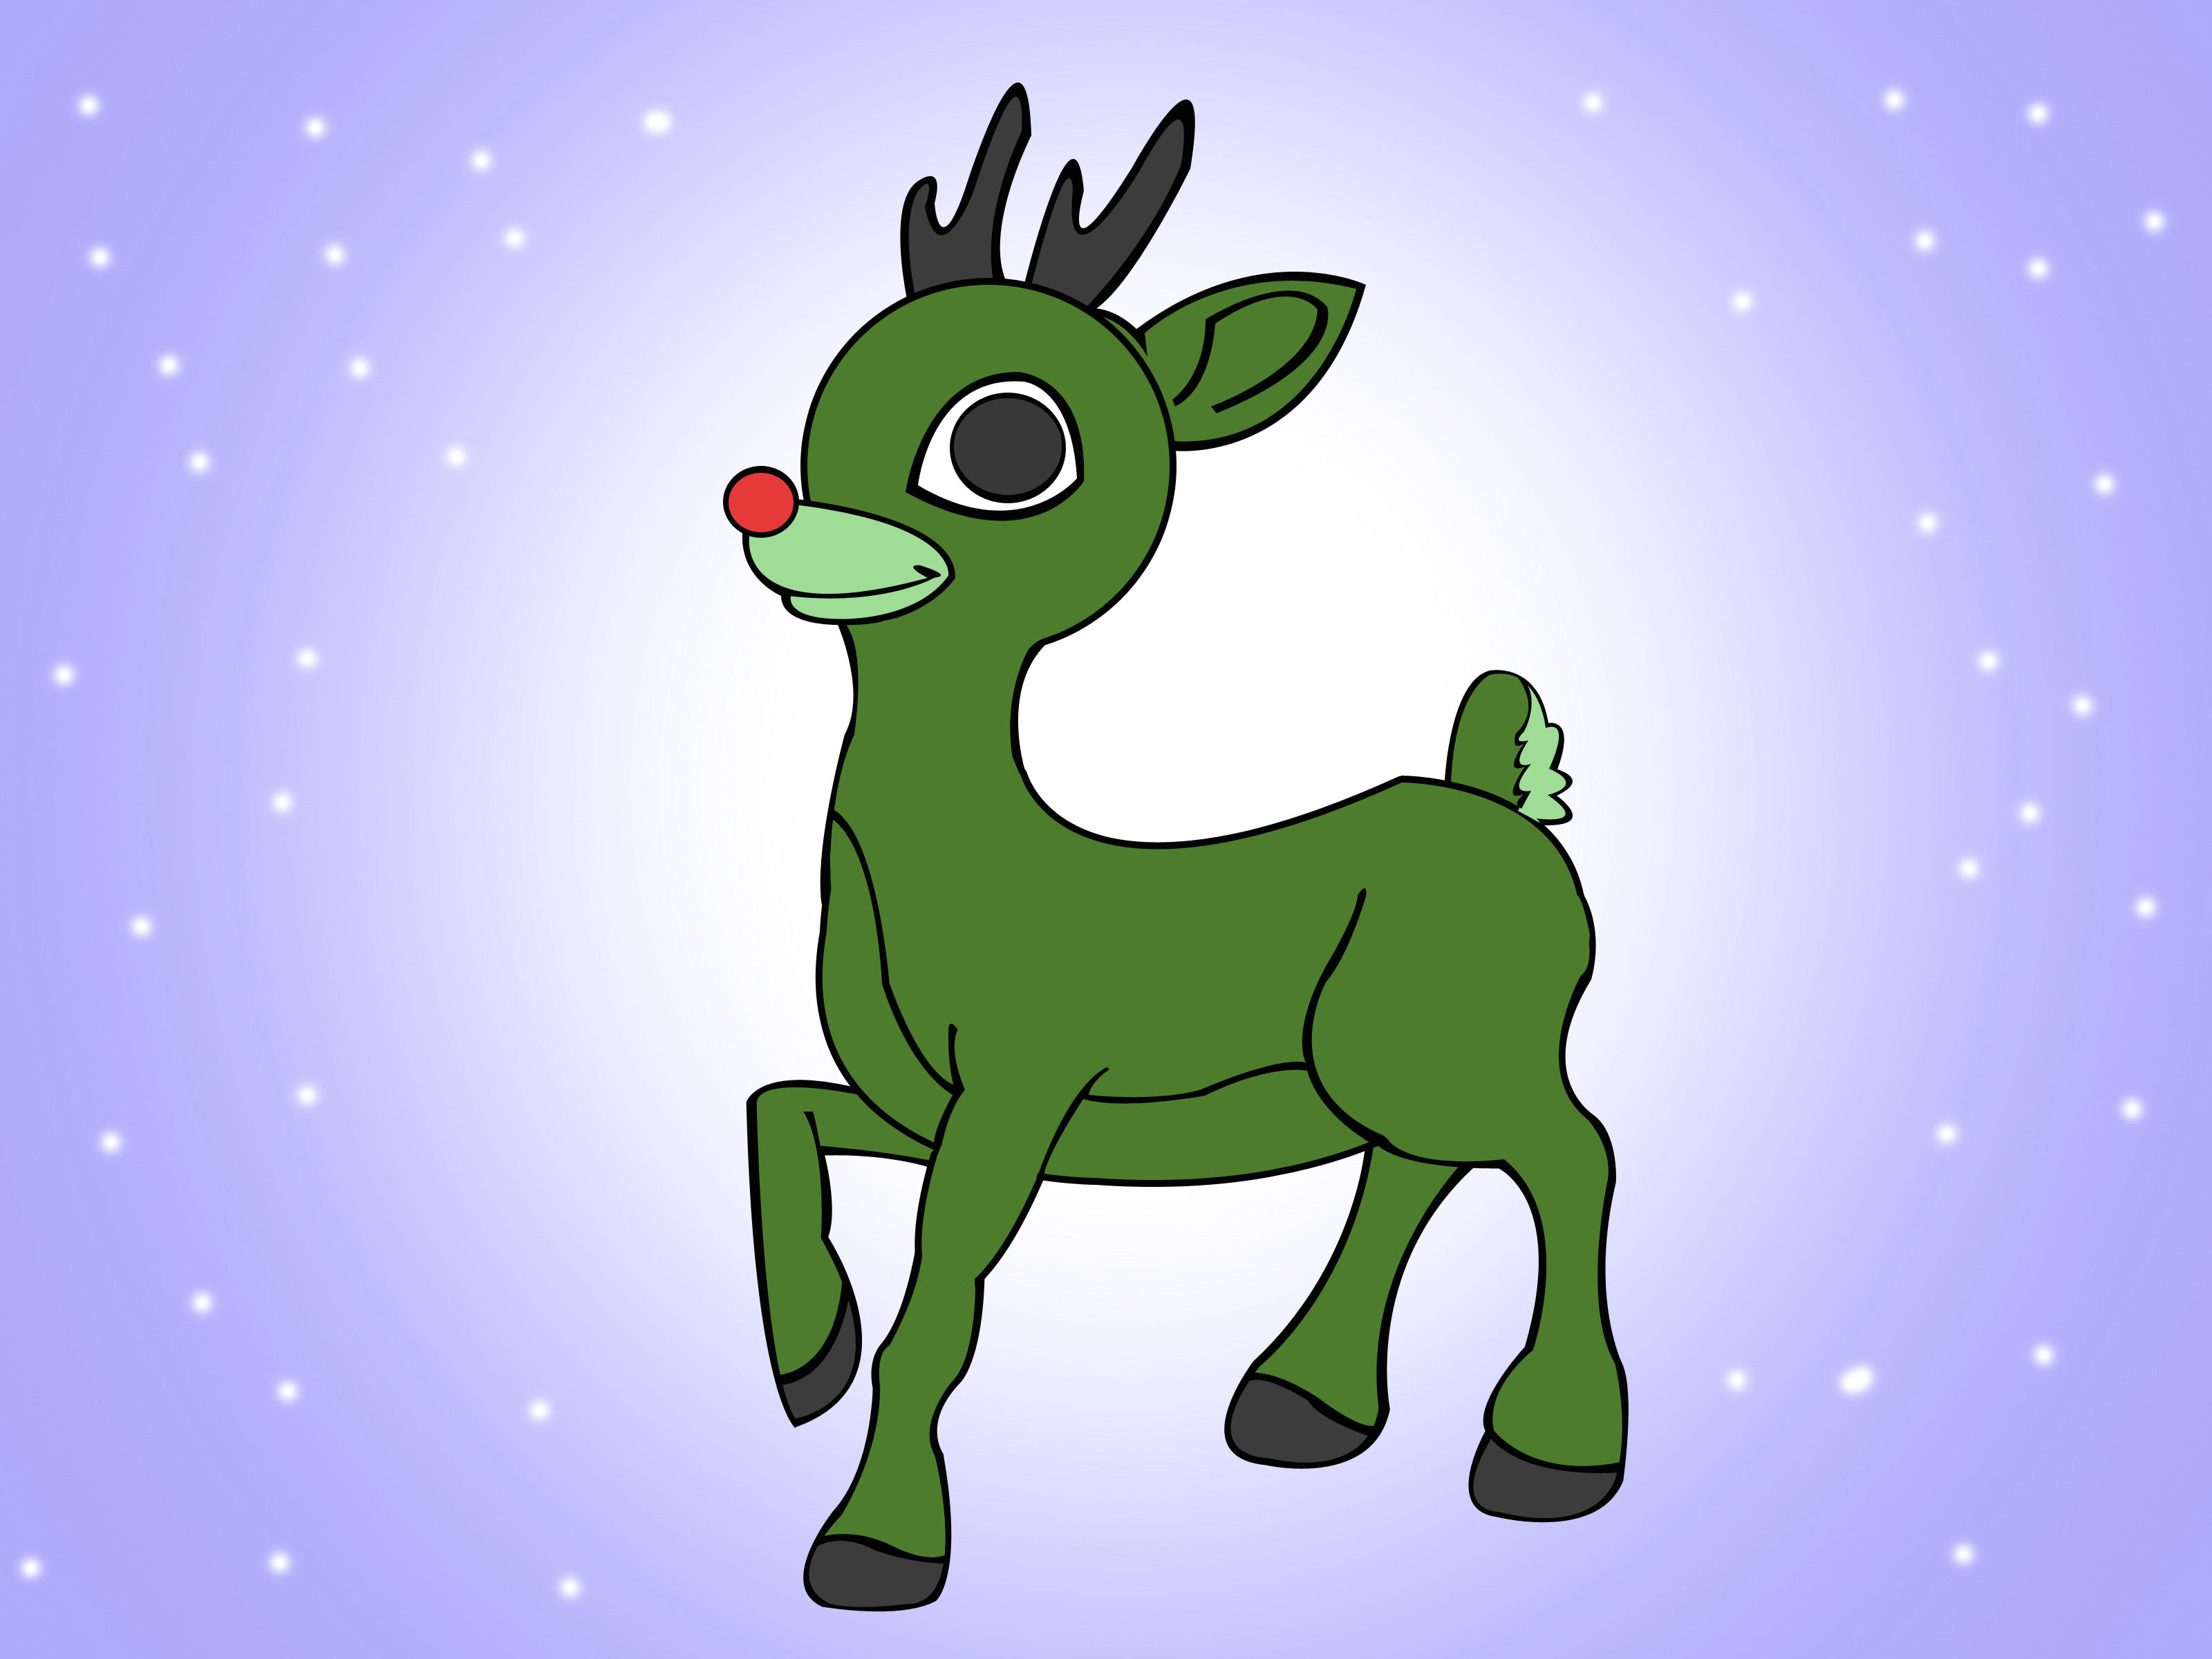 Cartoon Drawing Rudolph Red Nosed Reindeer How to Draw Rudolph the Red Nosed Reindeer 7 Steps